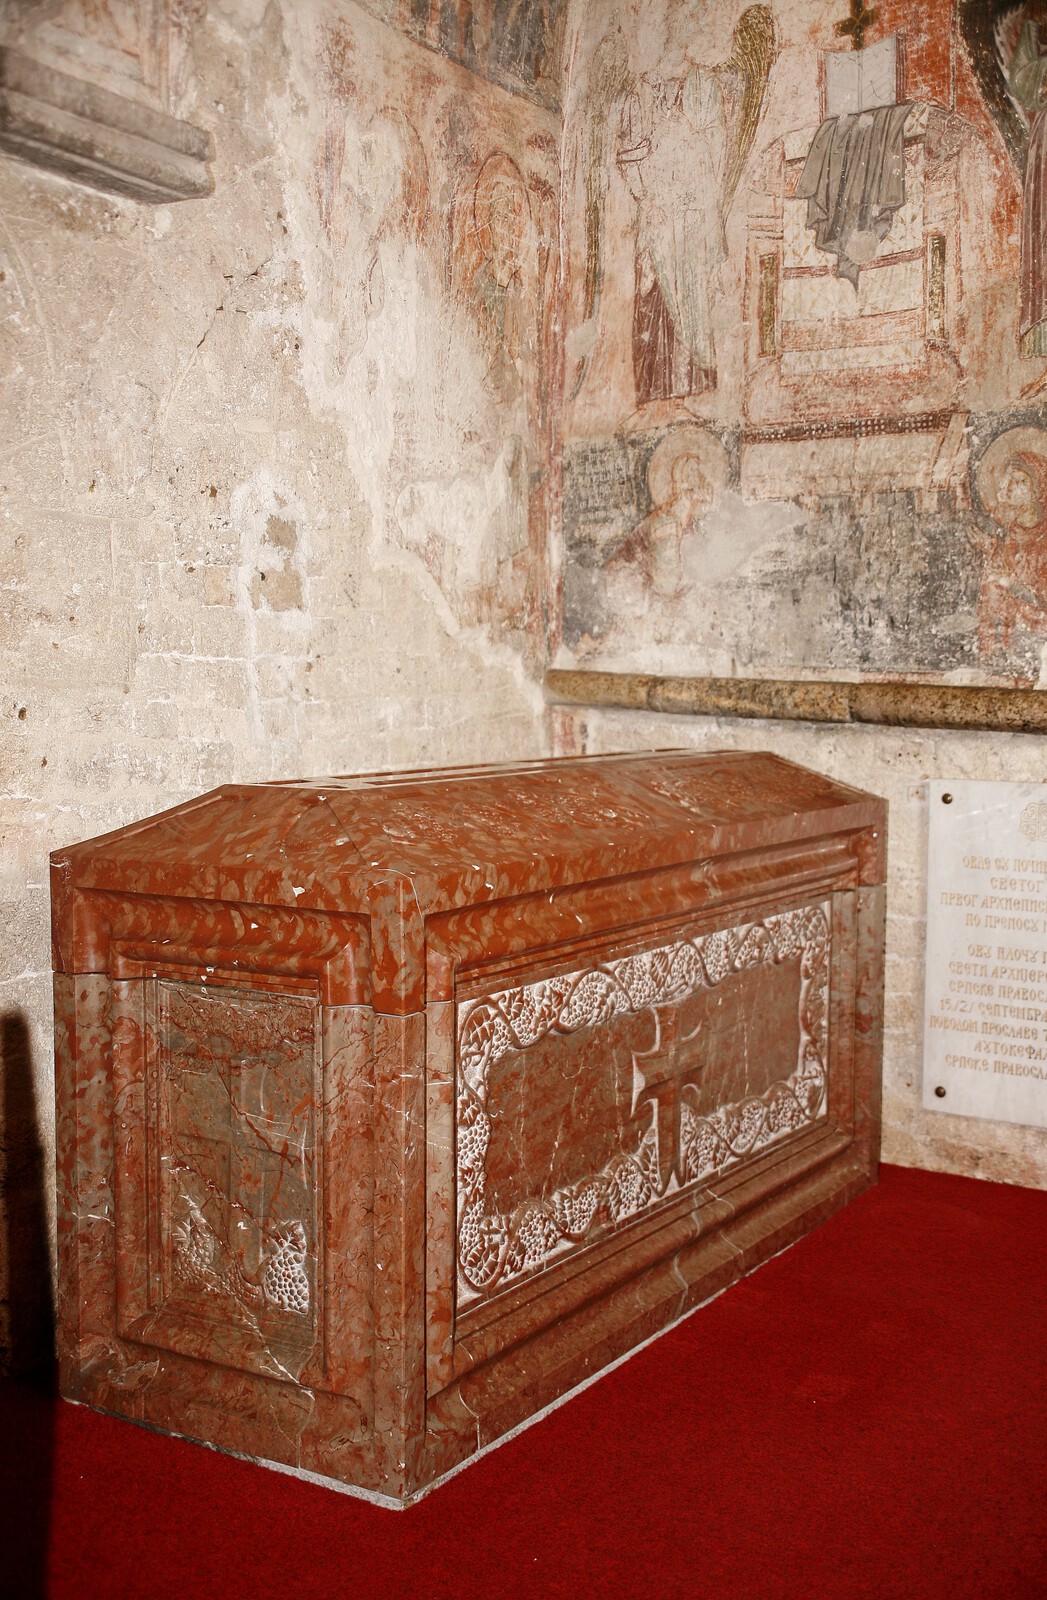 Reconstructed sarcophagus that housed the relics of St Sava